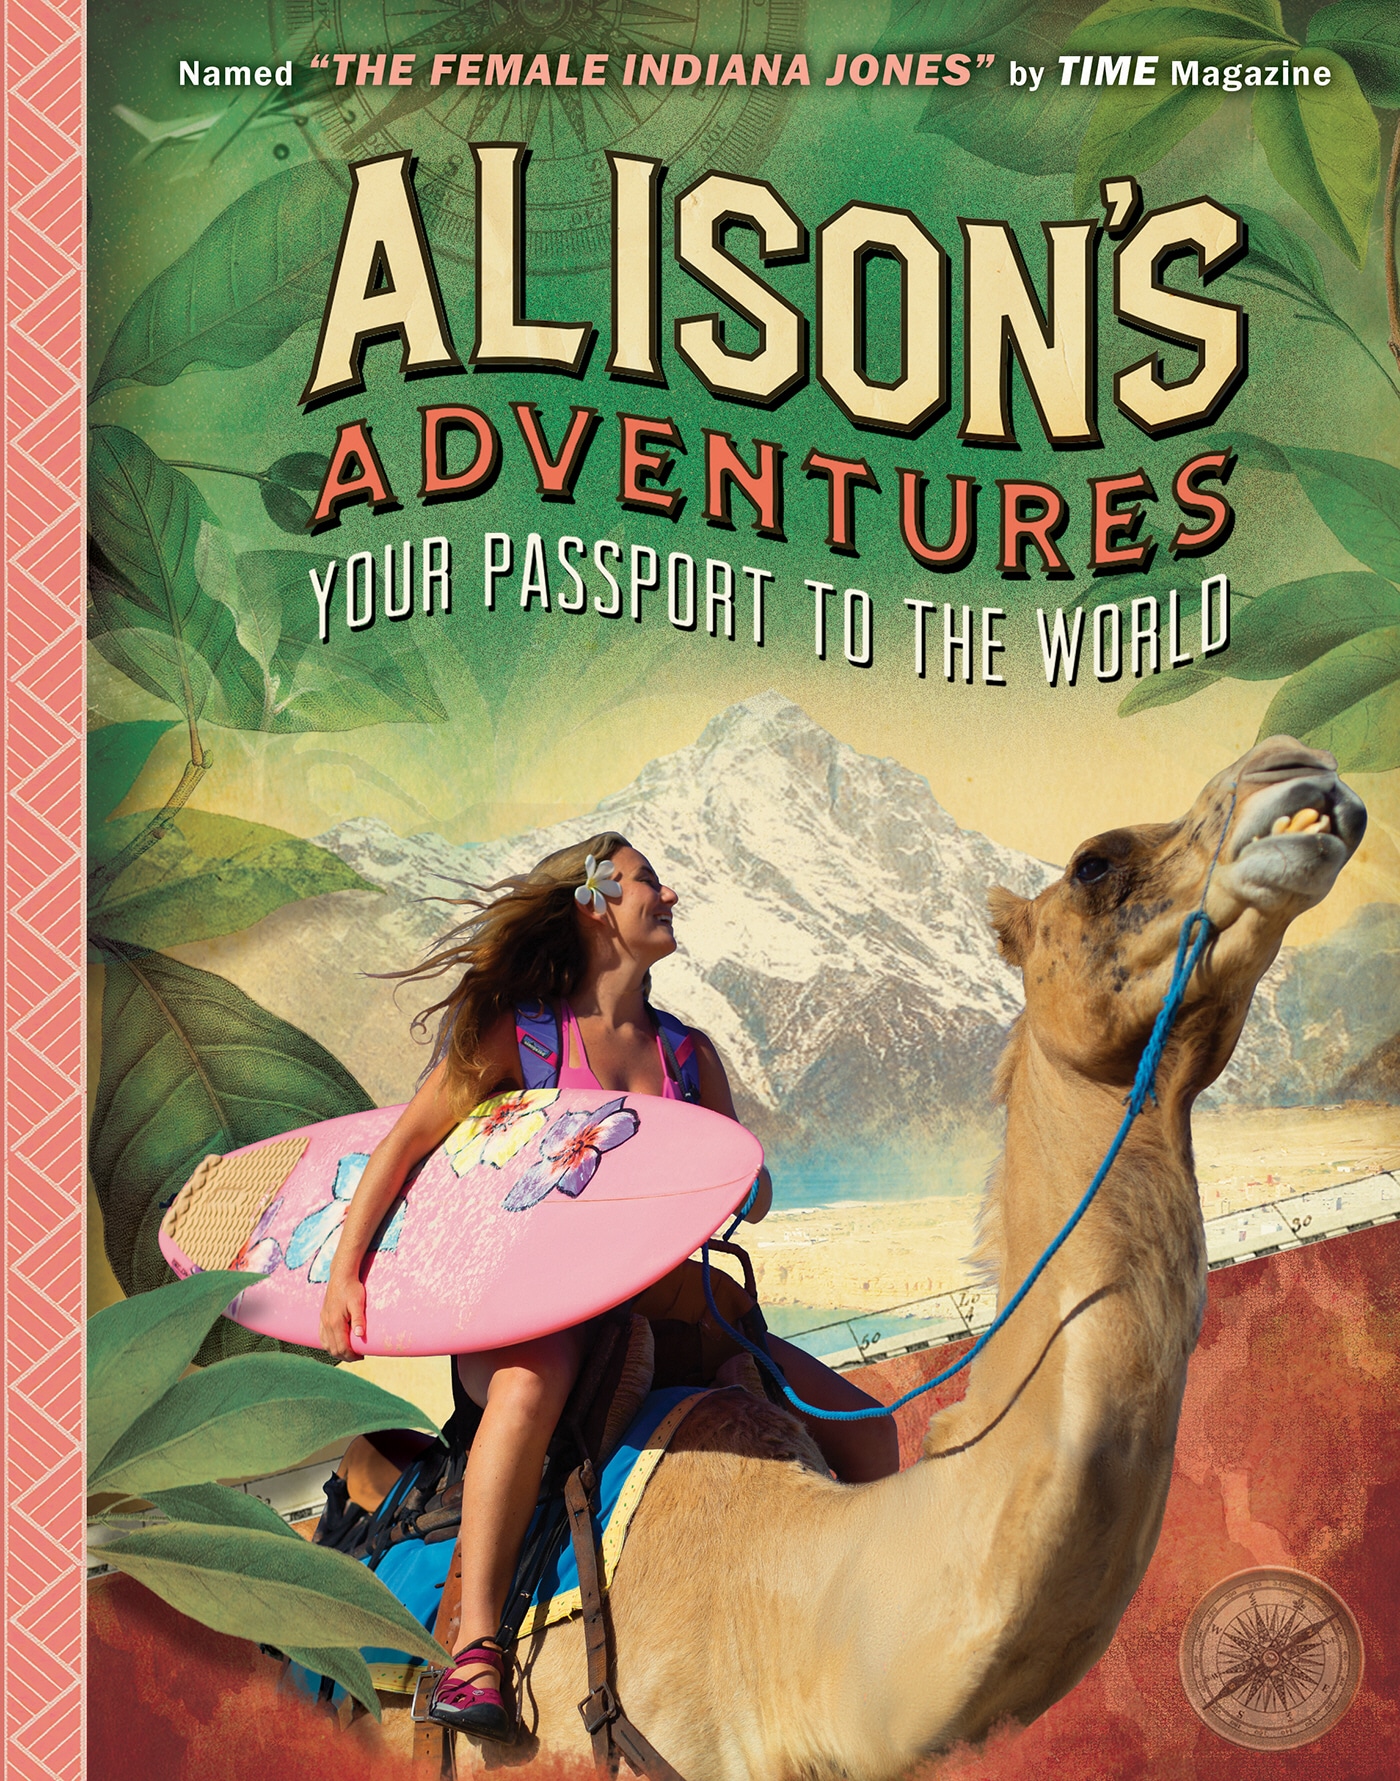 Book “Alison's Adventures” by Ripley — May 14, 2020